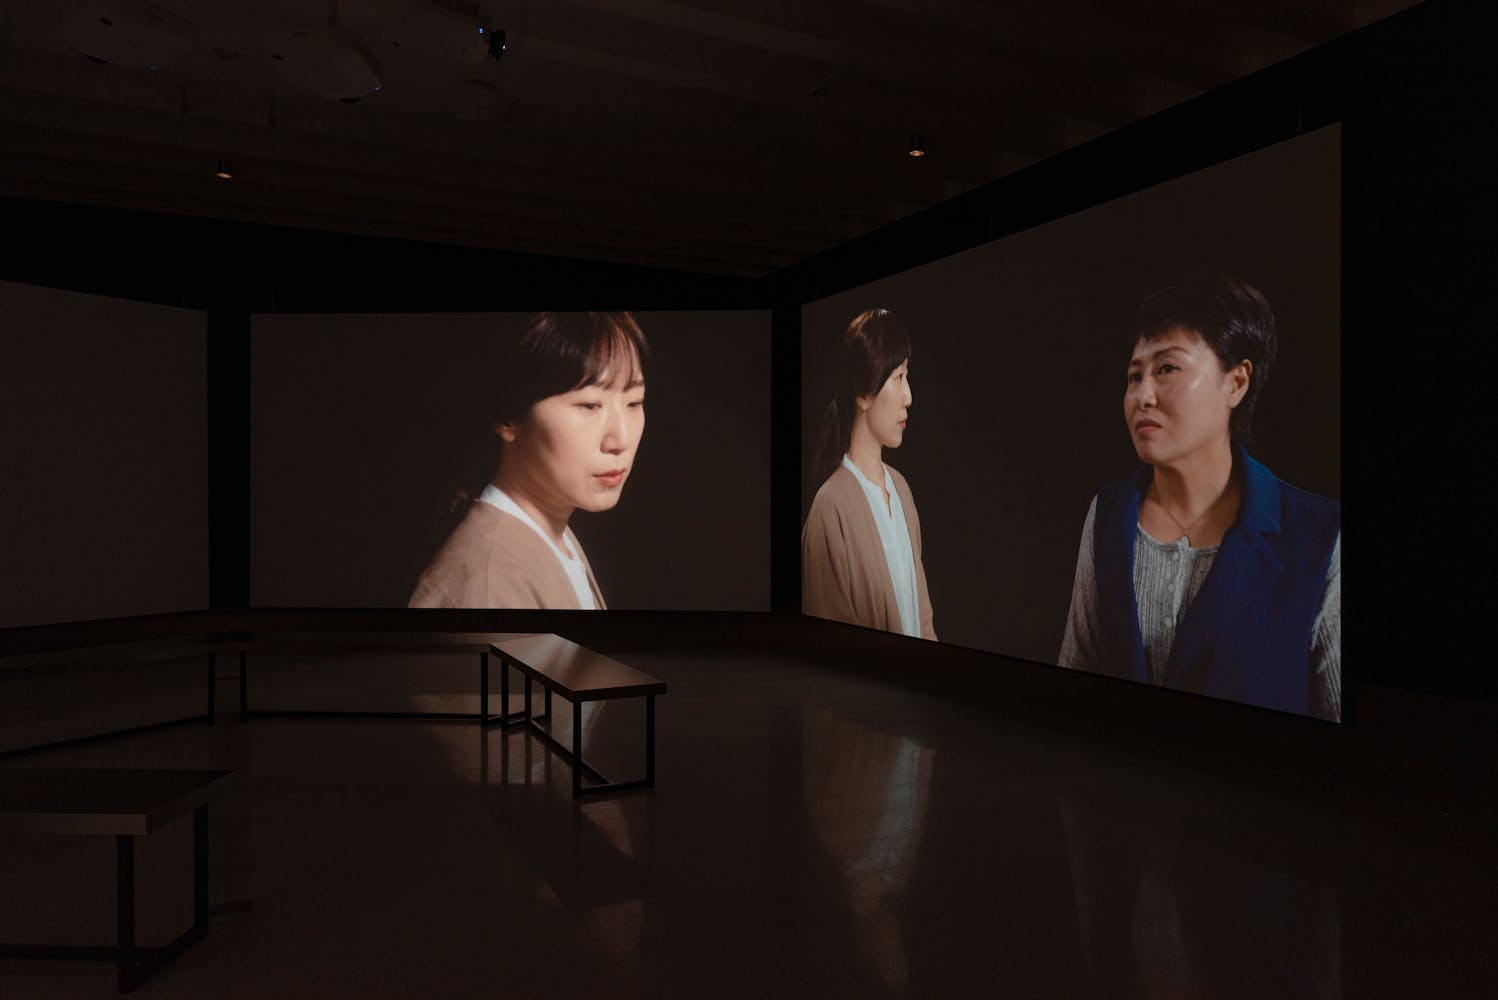 Large projection screens in dark gallery featuring images of women speaking